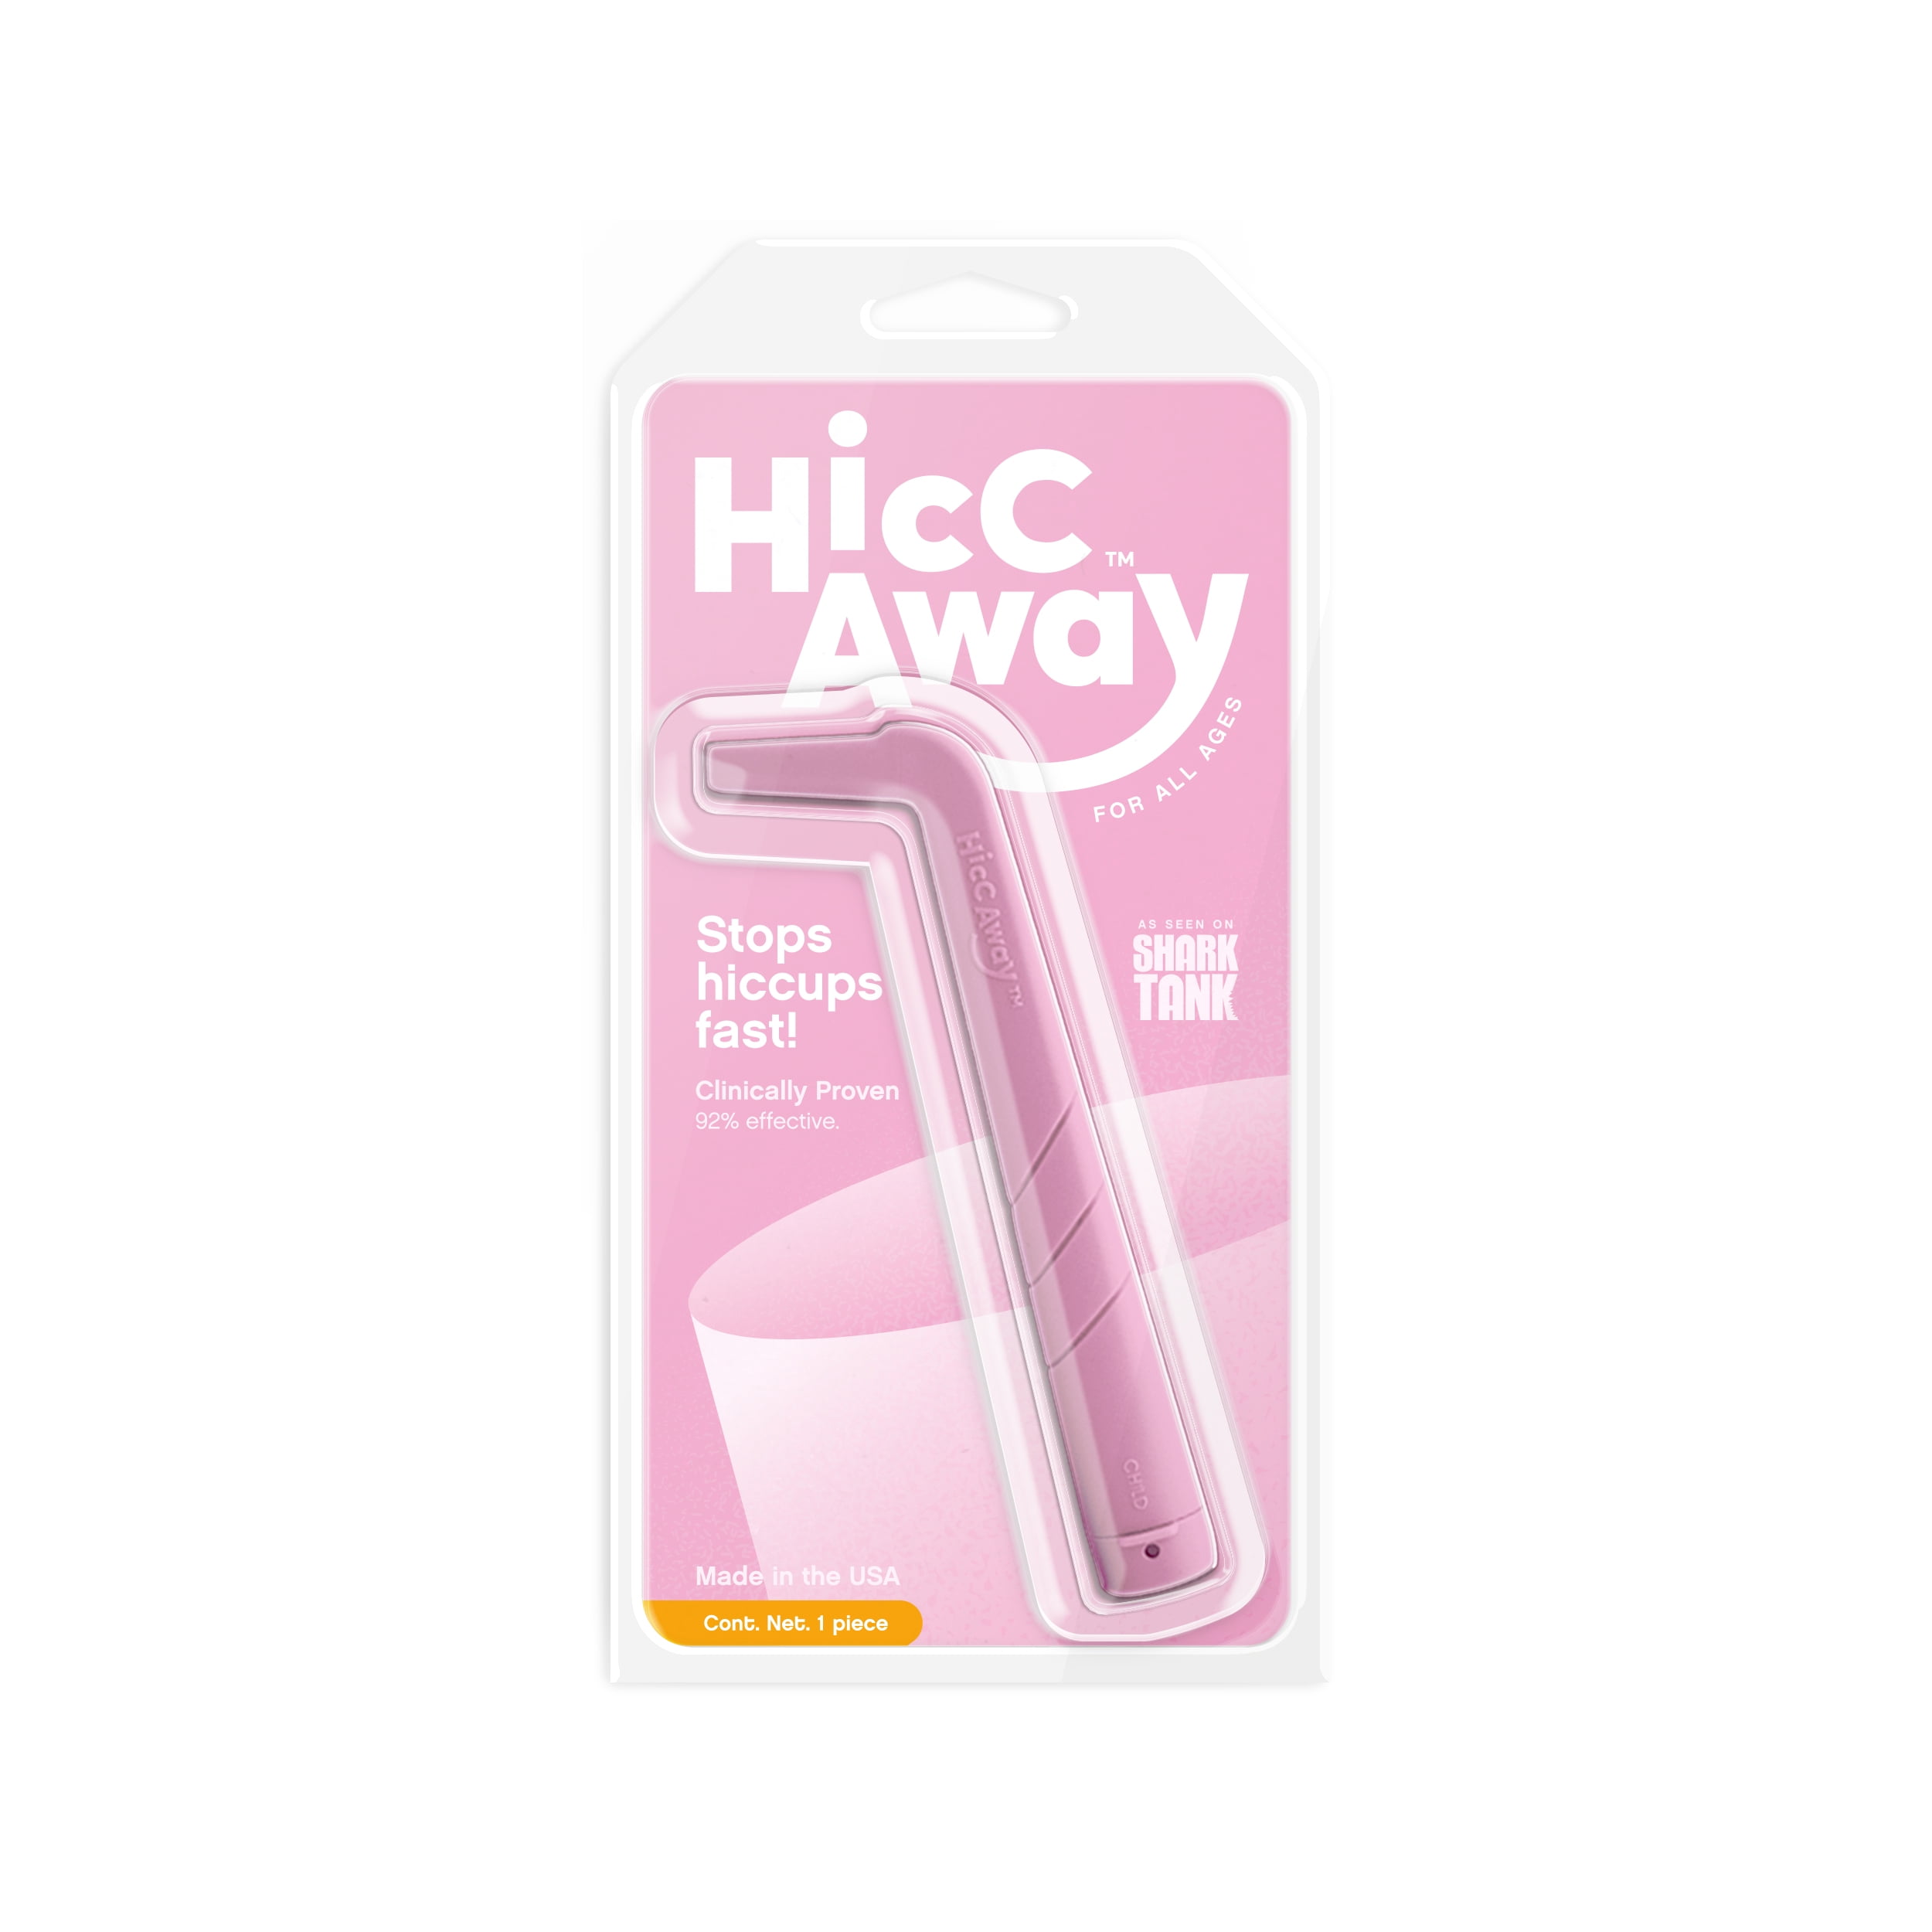 HiccAway Hiccup Straw Stops Hiccups Fast! Clinically Proven Hiccup Relief for All Ages. Shark Tank Backed! (HiccAway + Case, Pink)